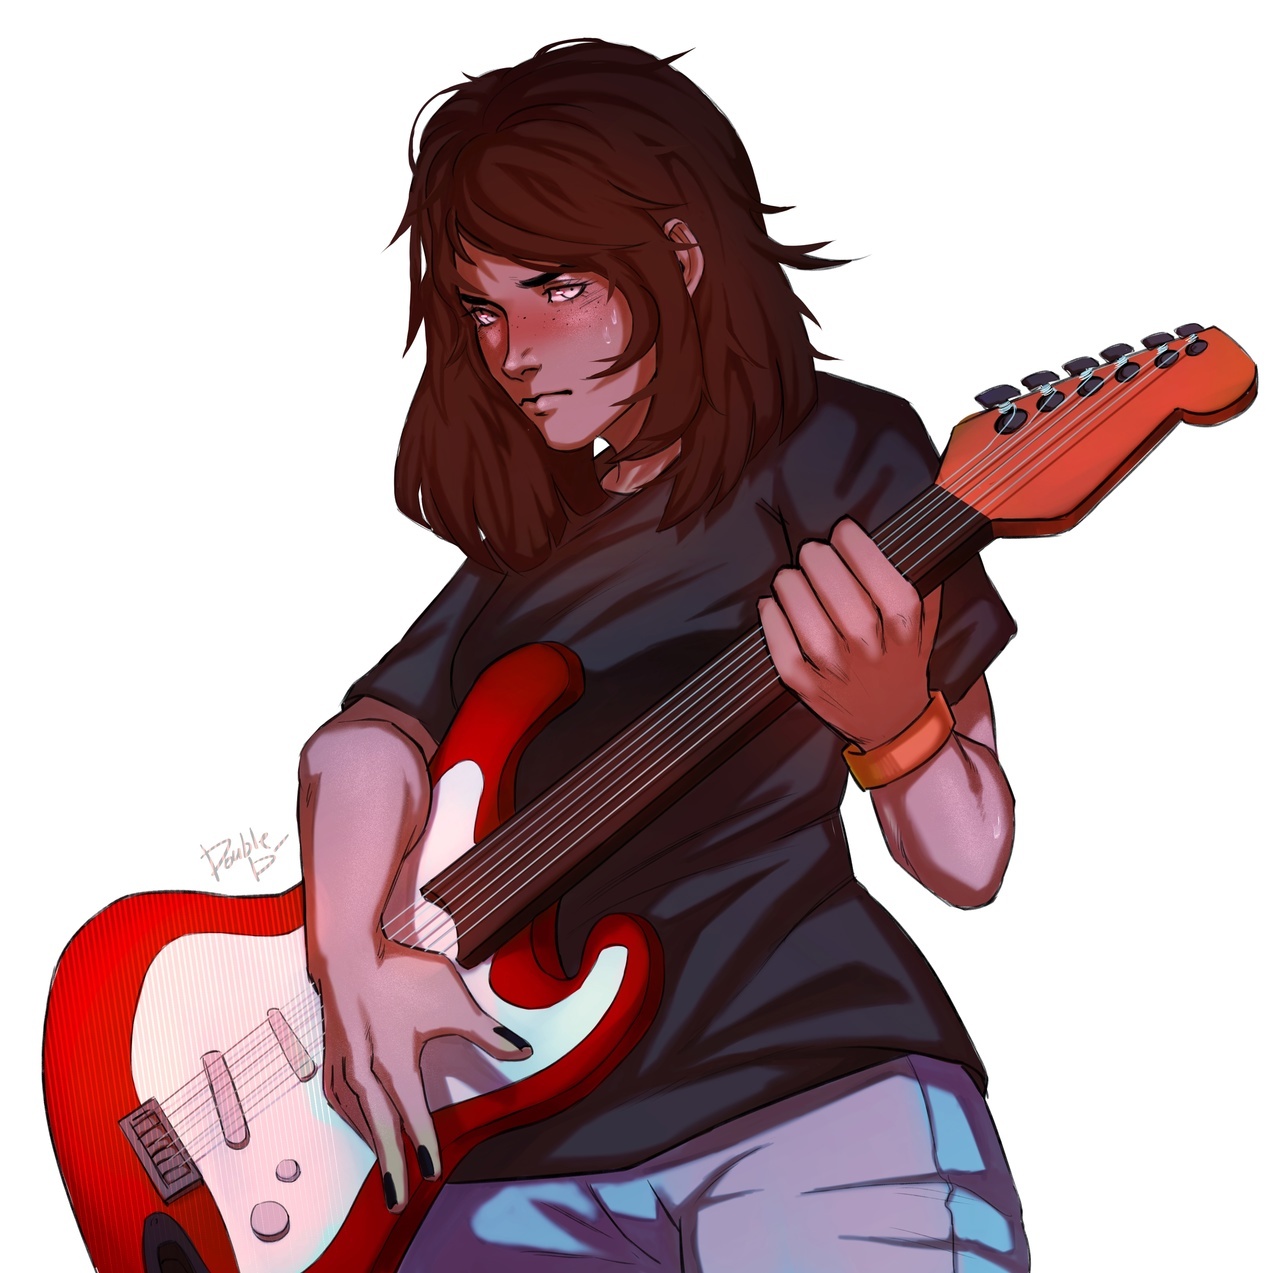 commissioned art of Kelly with her guitar, by Double_D